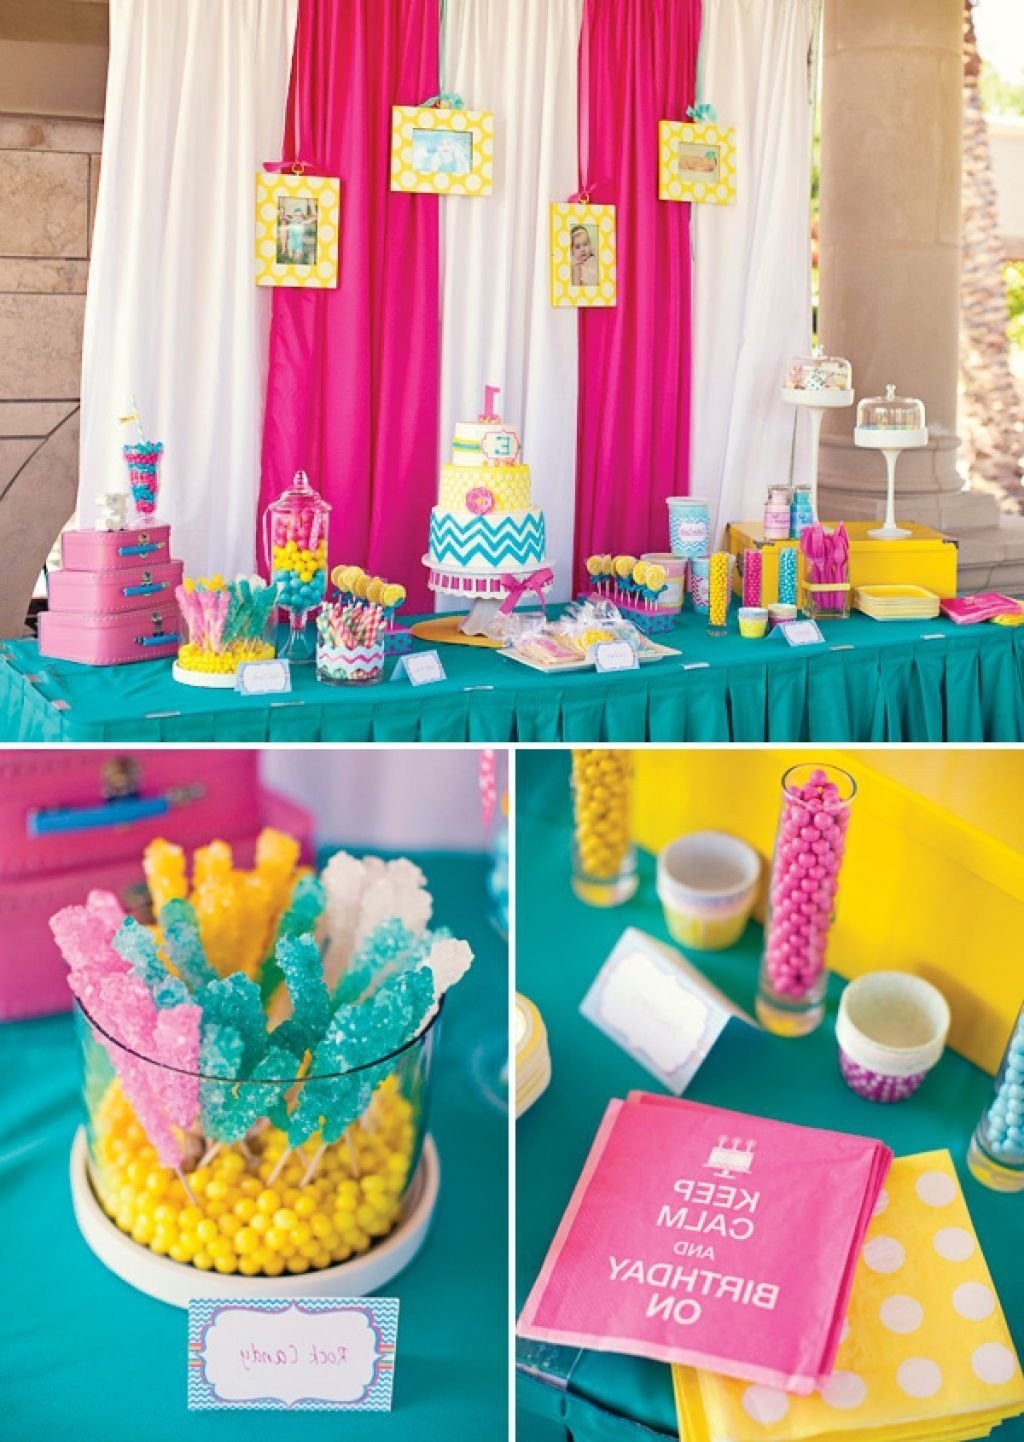 10 Fashionable Birthday Party Ideas For 6 Year Olds outdoor party decorations google search madeline pinterest 47 2022